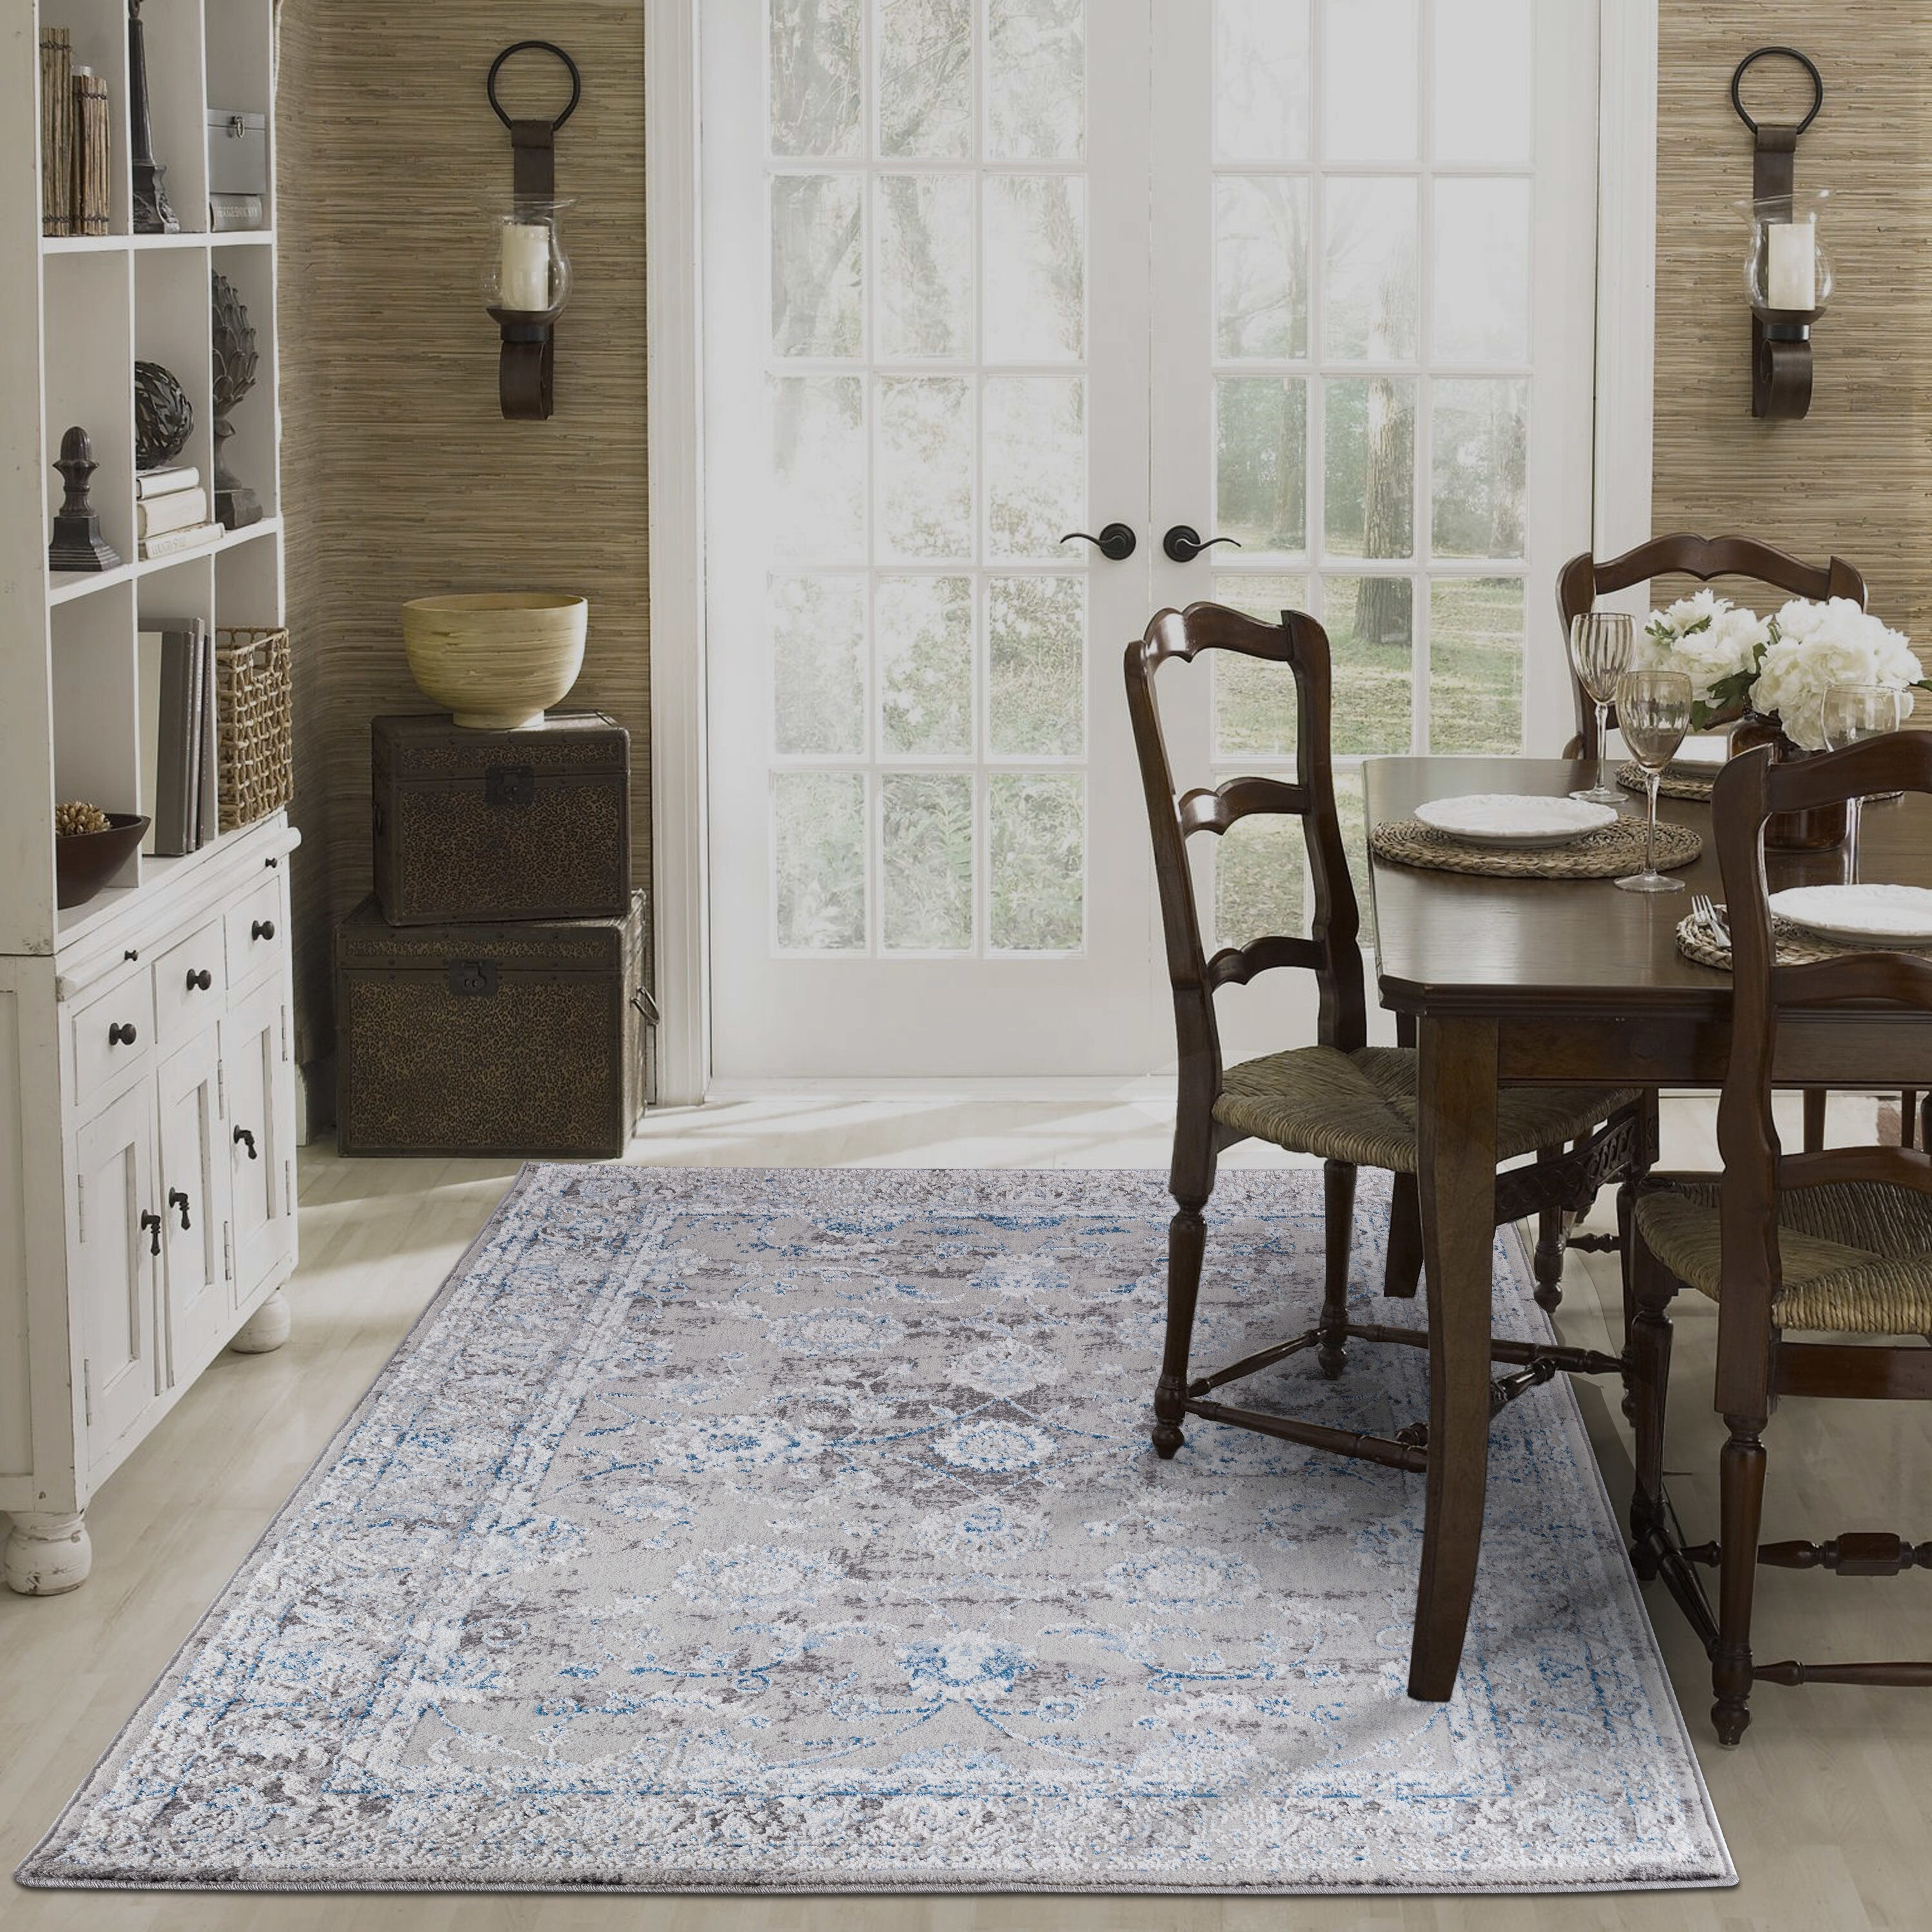 The Sofia Rugs Sofihas 2 Piece Kitchen Rug Sets 48in x 15in x 30in